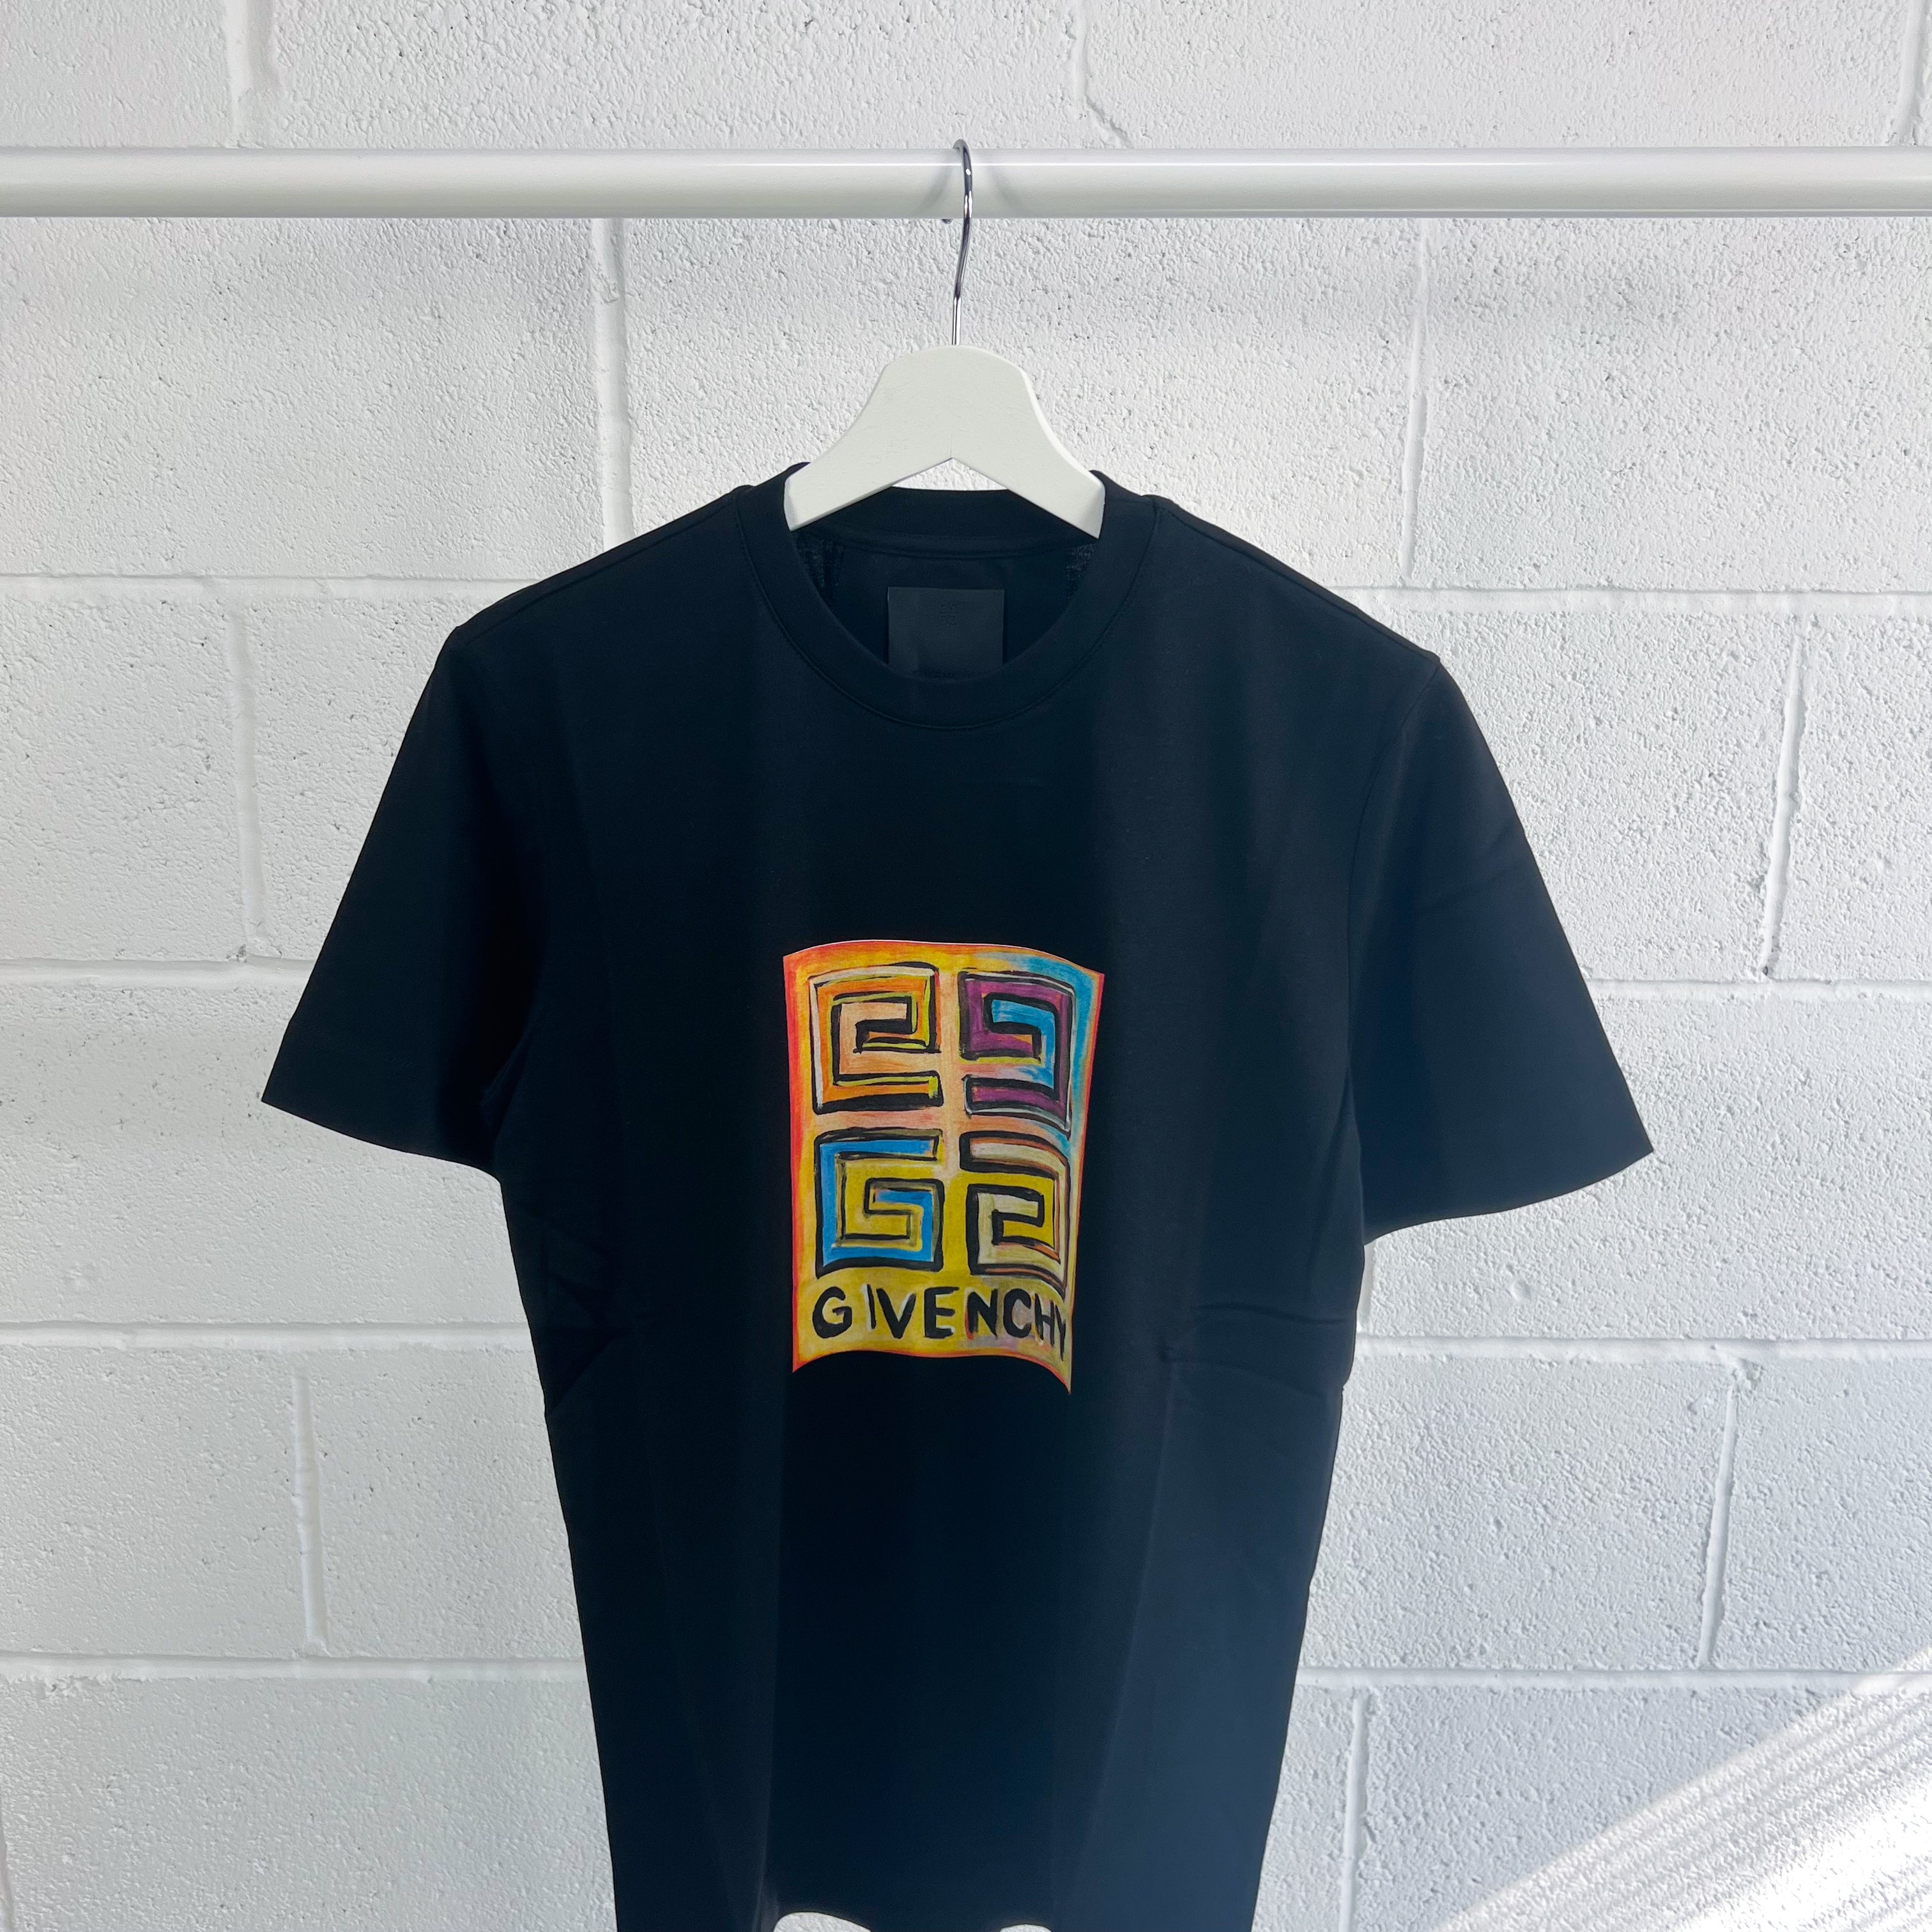 Givenchy 4G Sketch Tee - Black